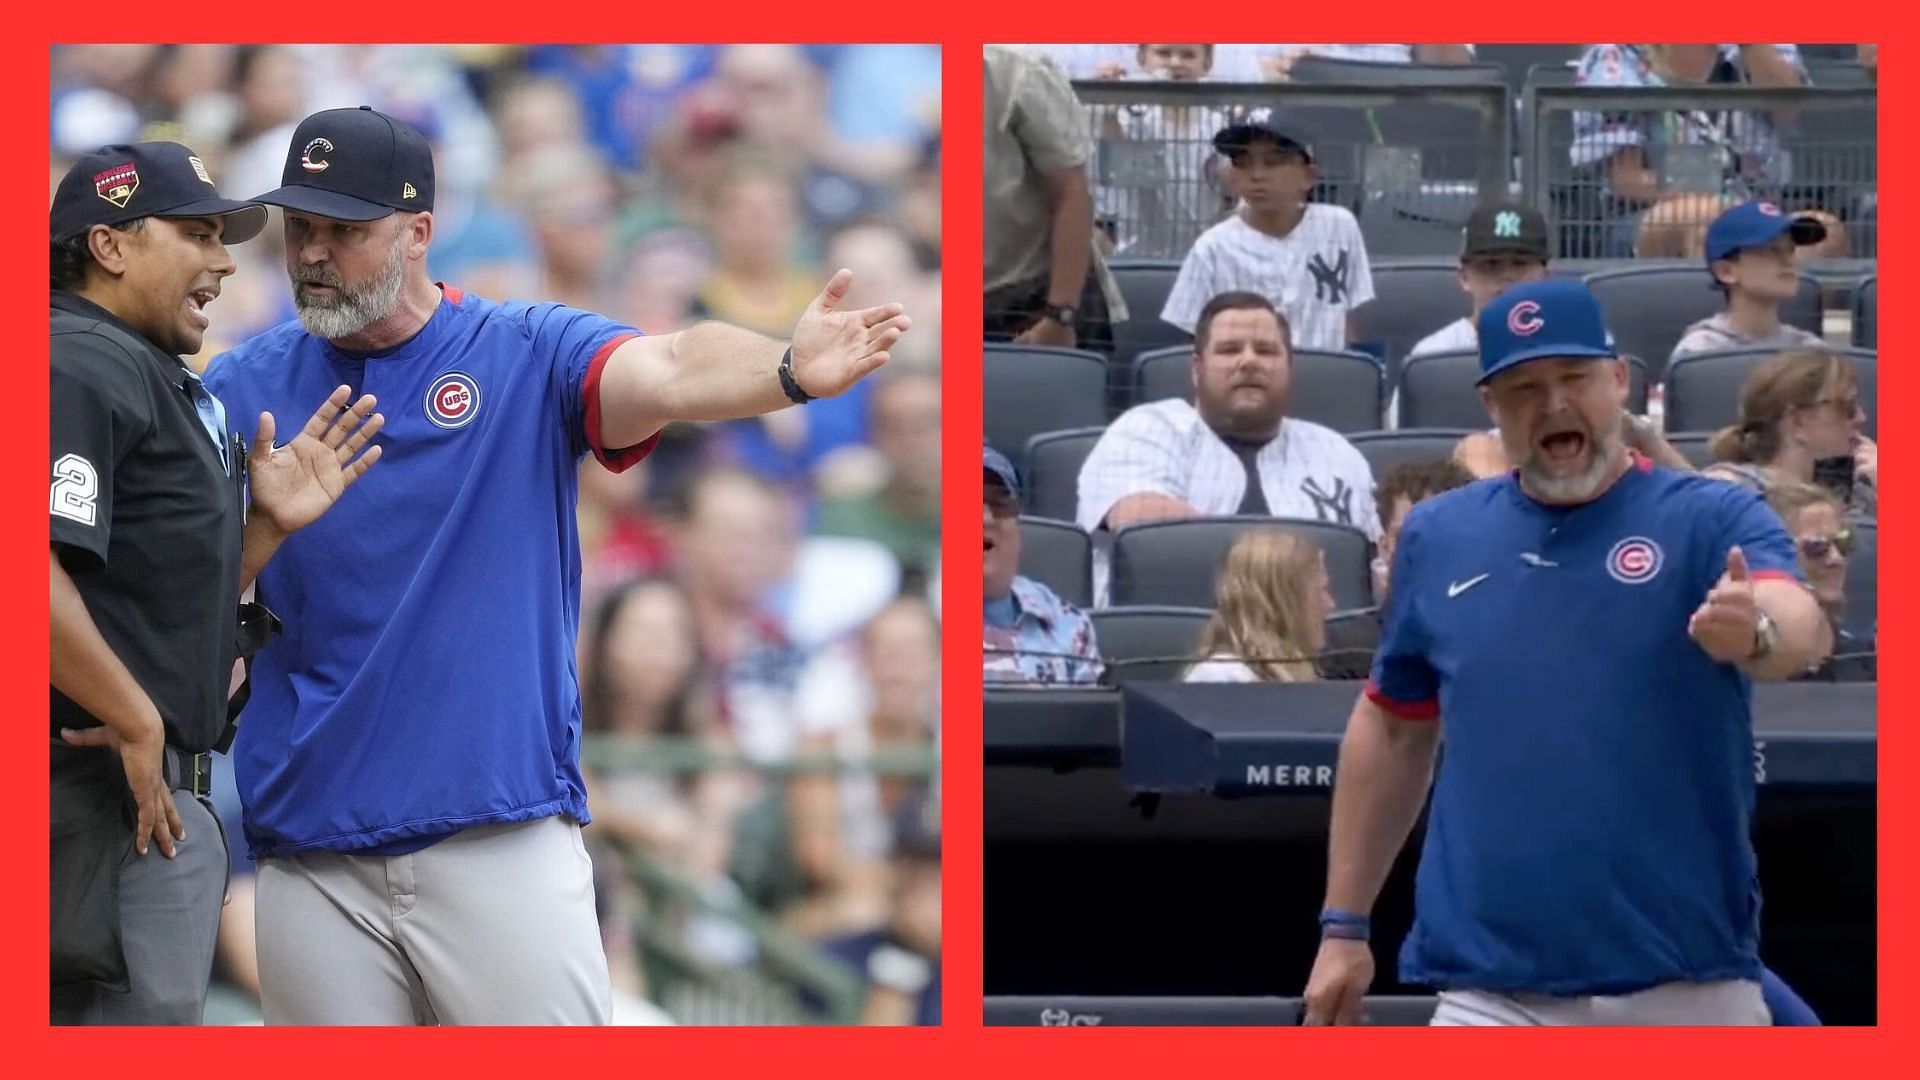 Chicago Cubs manager David Ross was ejected